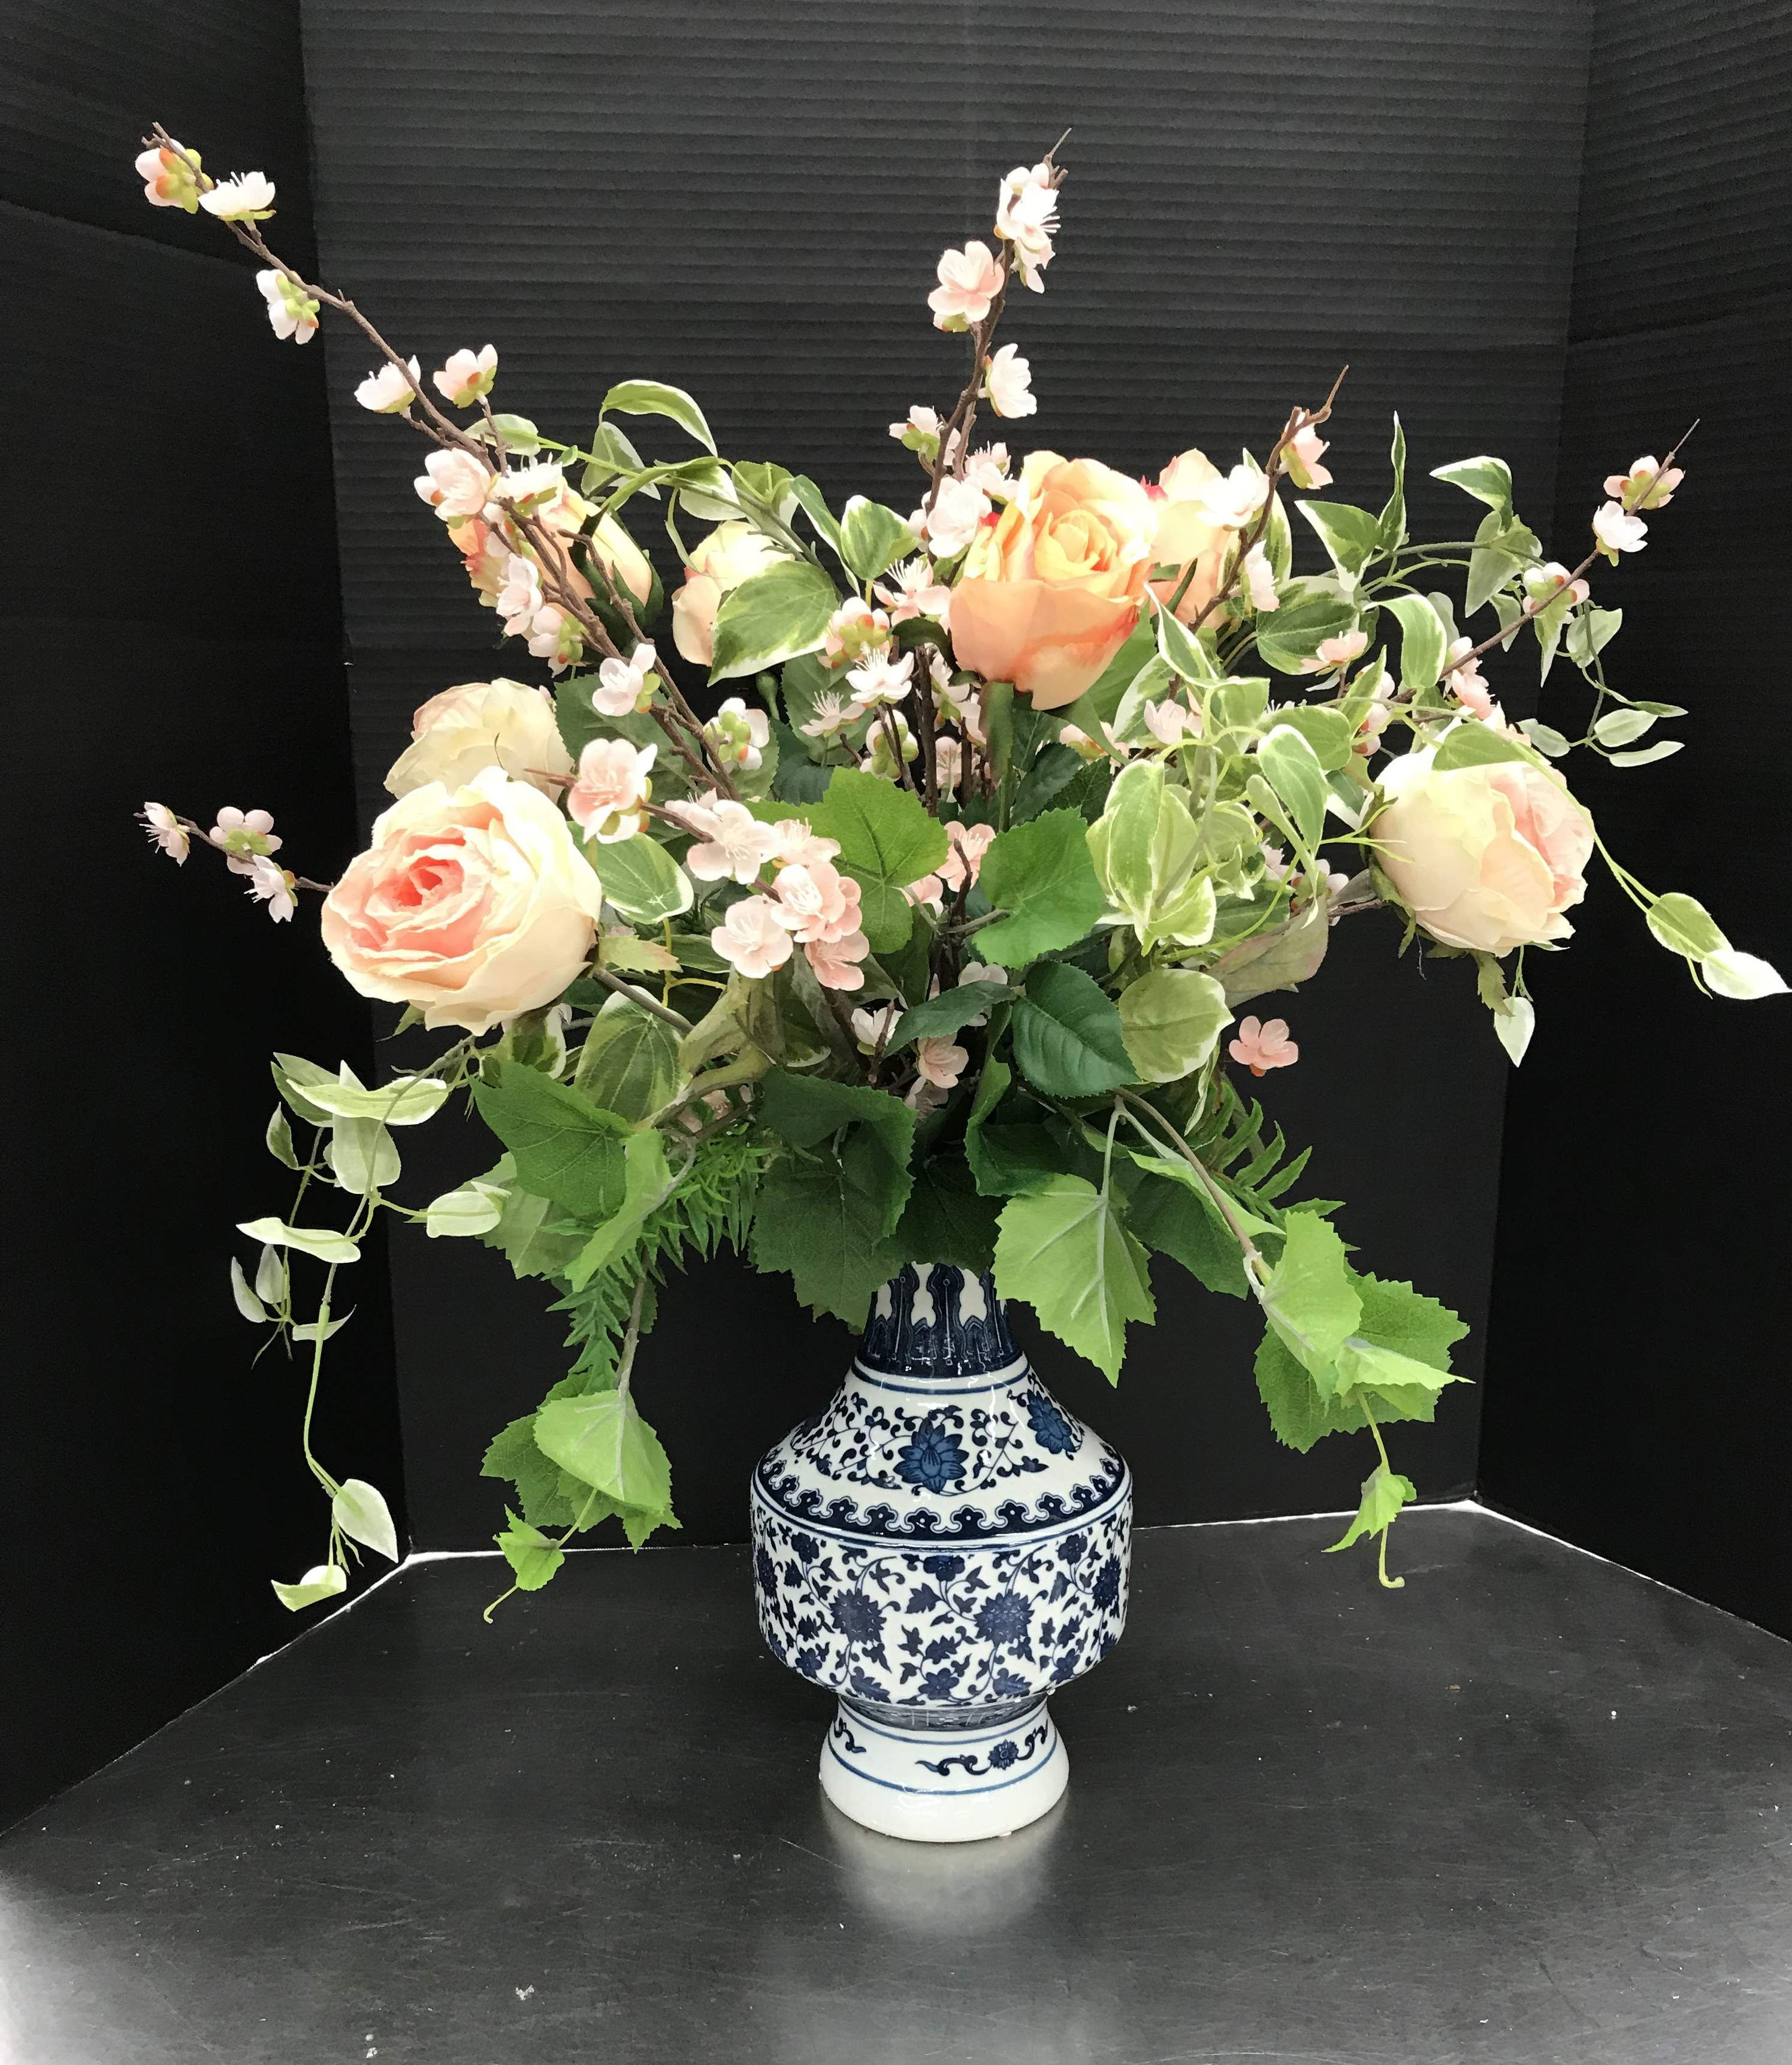 26 Elegant Michaels Glass Vases 2024 free download michaels glass vases of michaels glass vase pictures spring 2018 by randi at michaels 1600 within michaels glass vase pictures spring 2018 by randi at michaels 1600 diy floral ideas